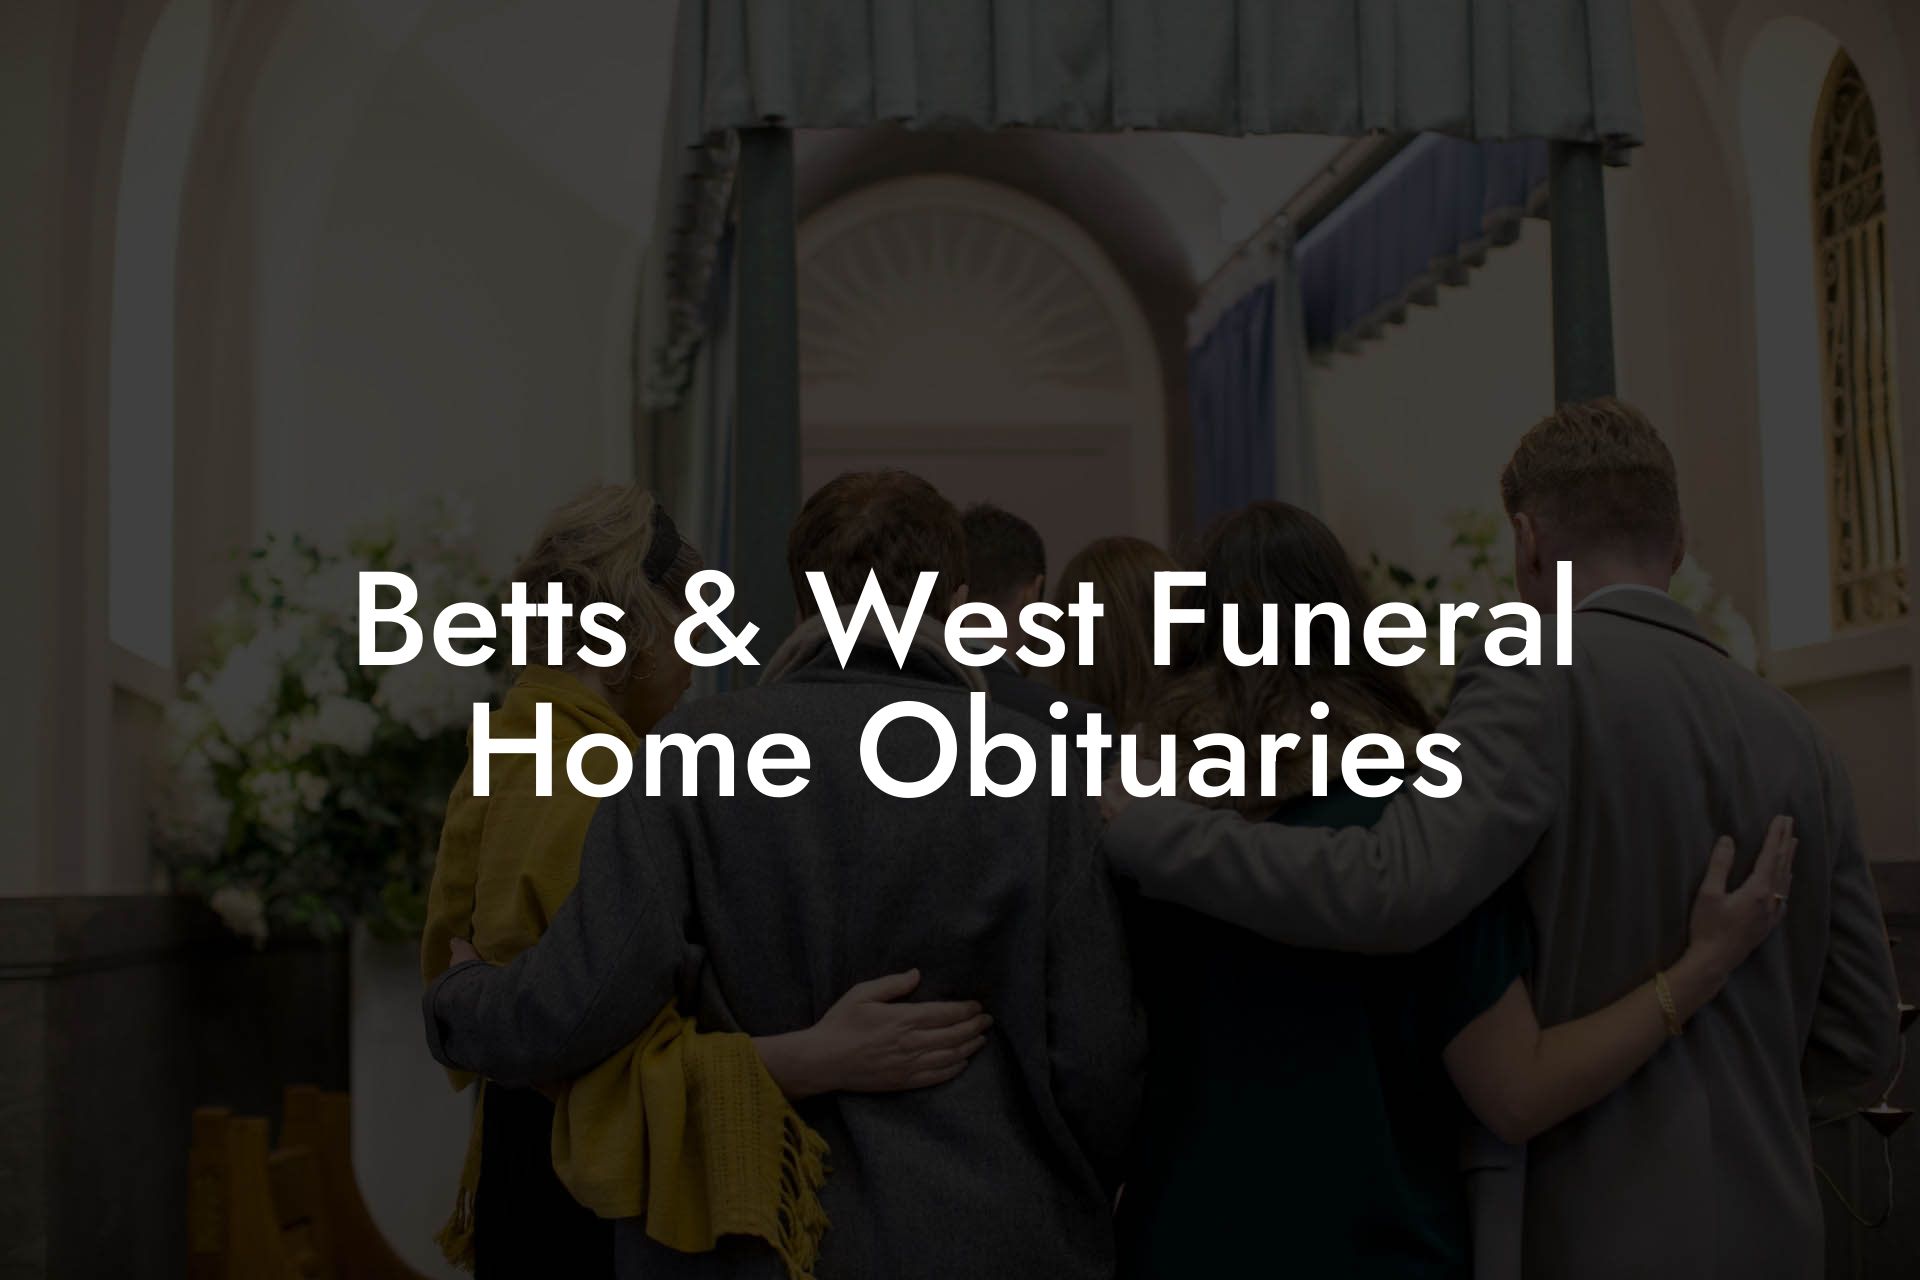 Betts & West Funeral Home Obituaries